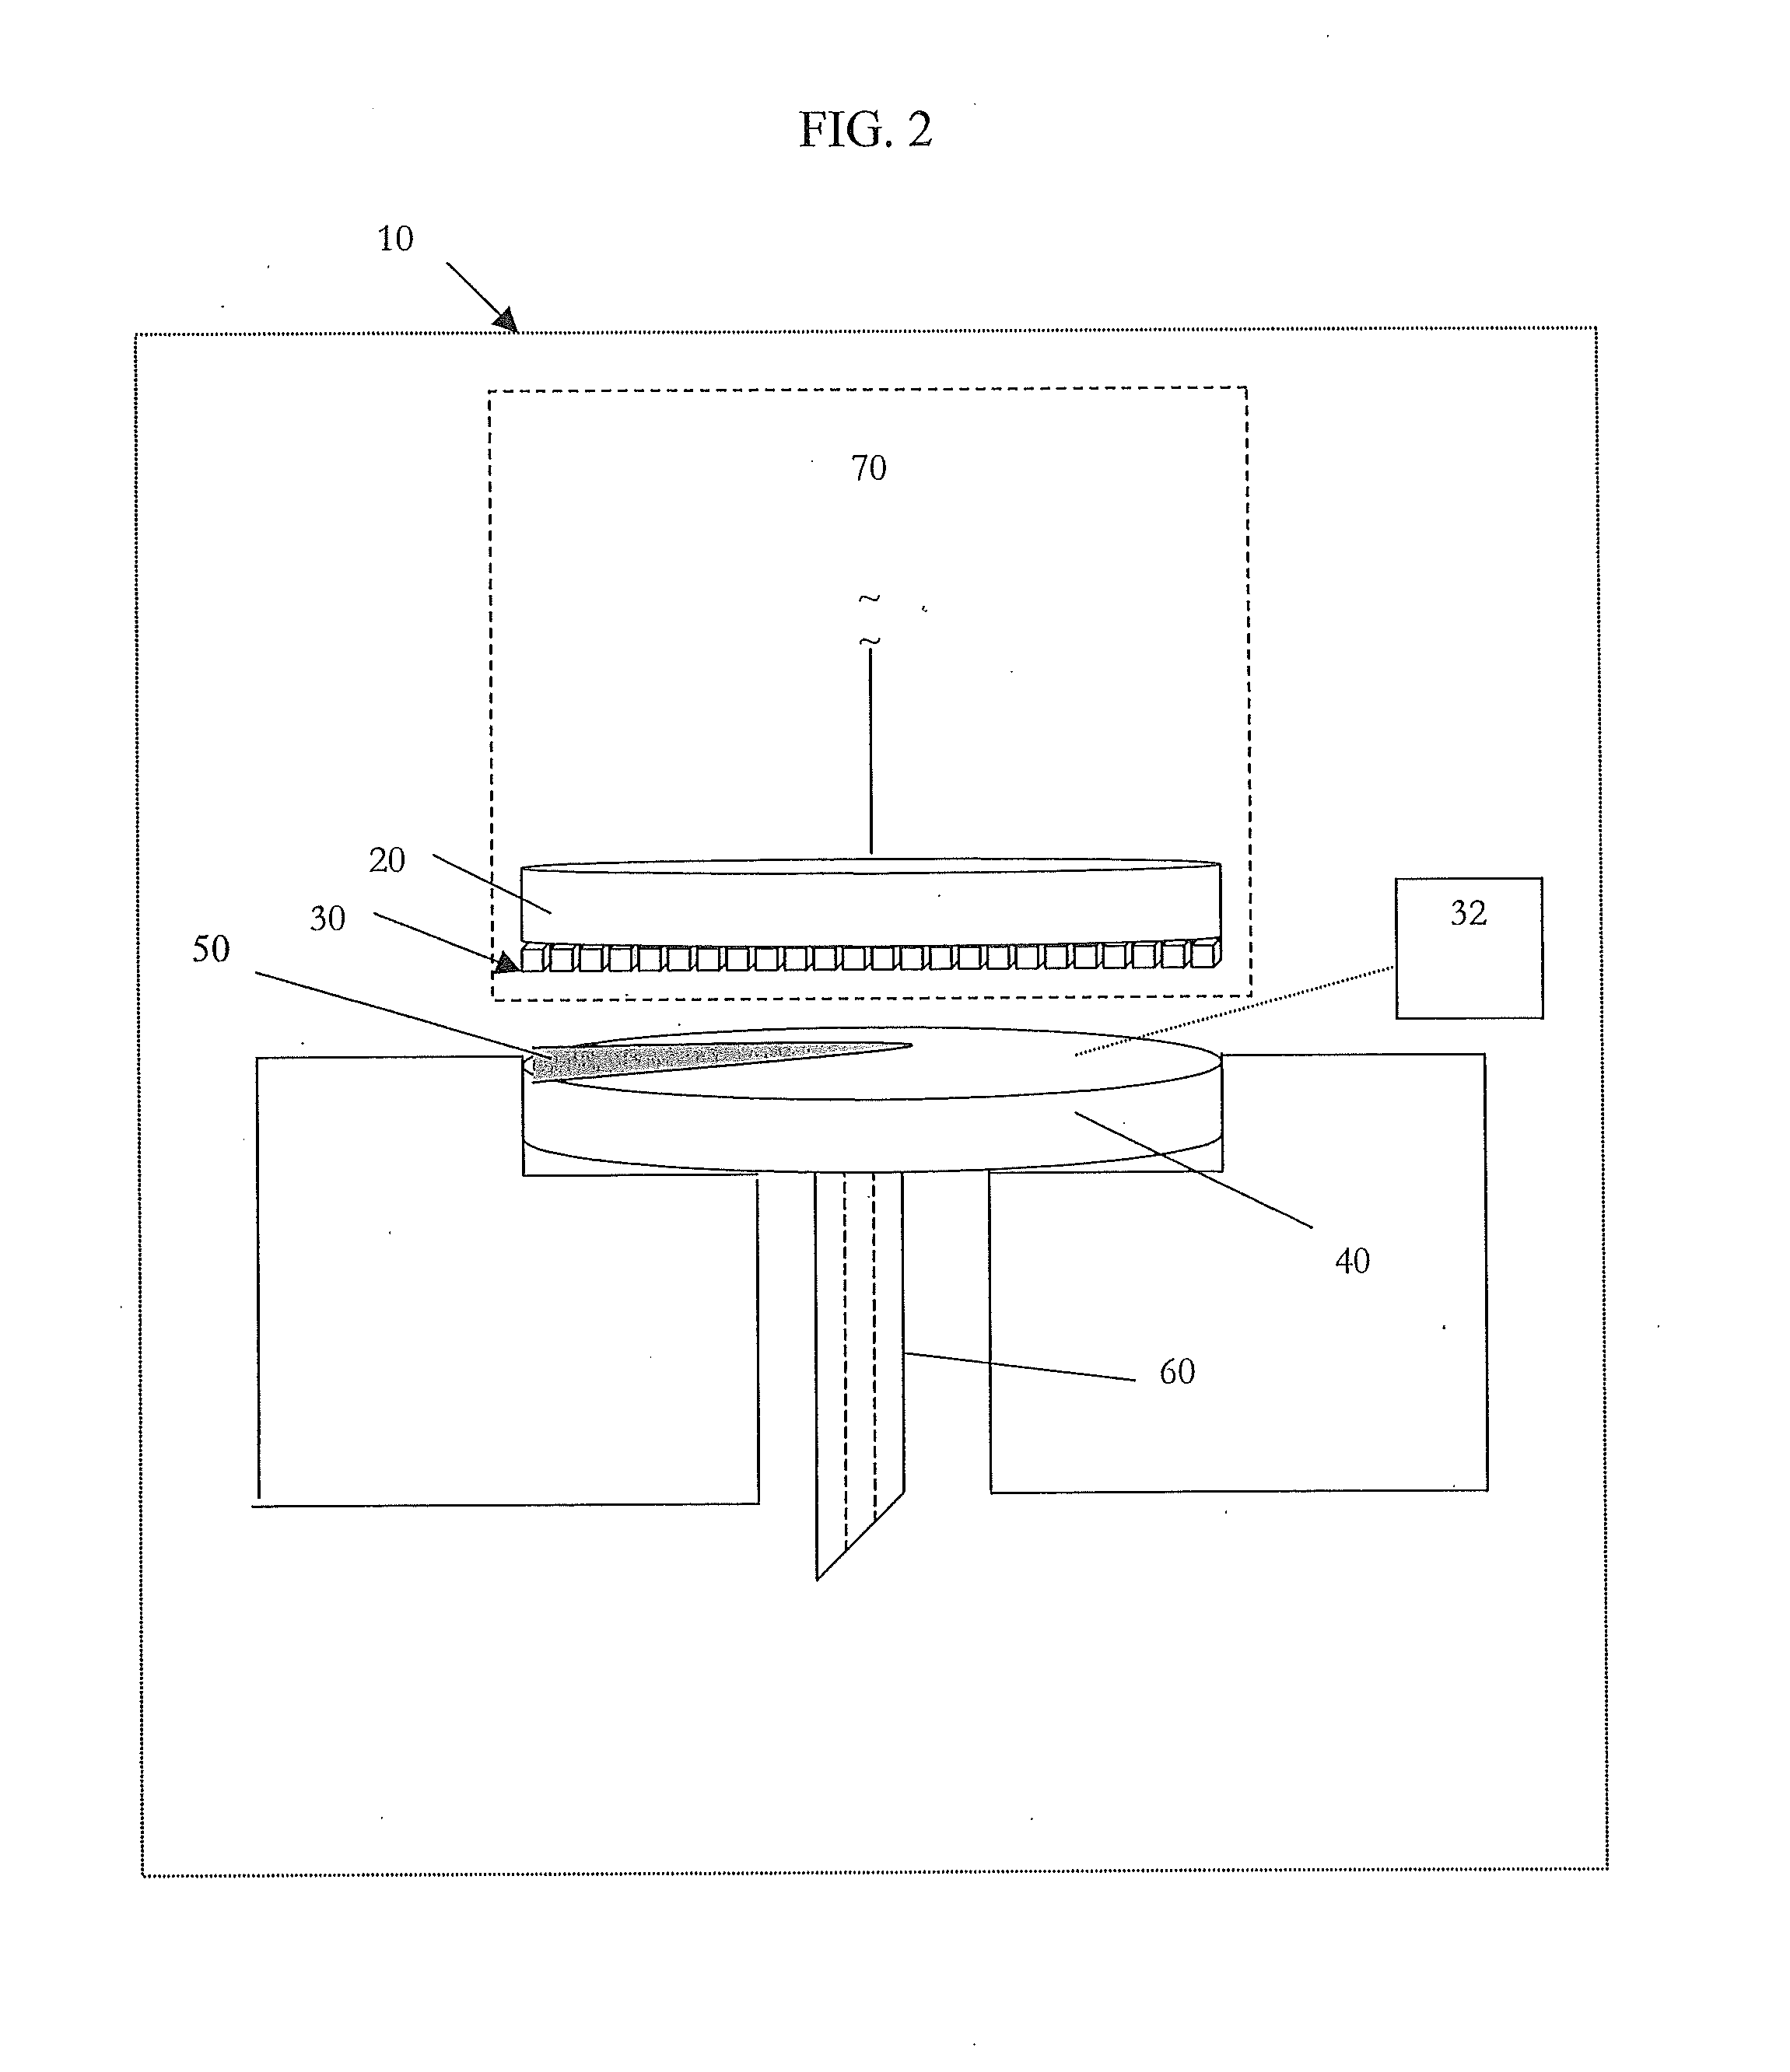 Analyte detection devices and methods with hematocrit-volume correction and feedback control